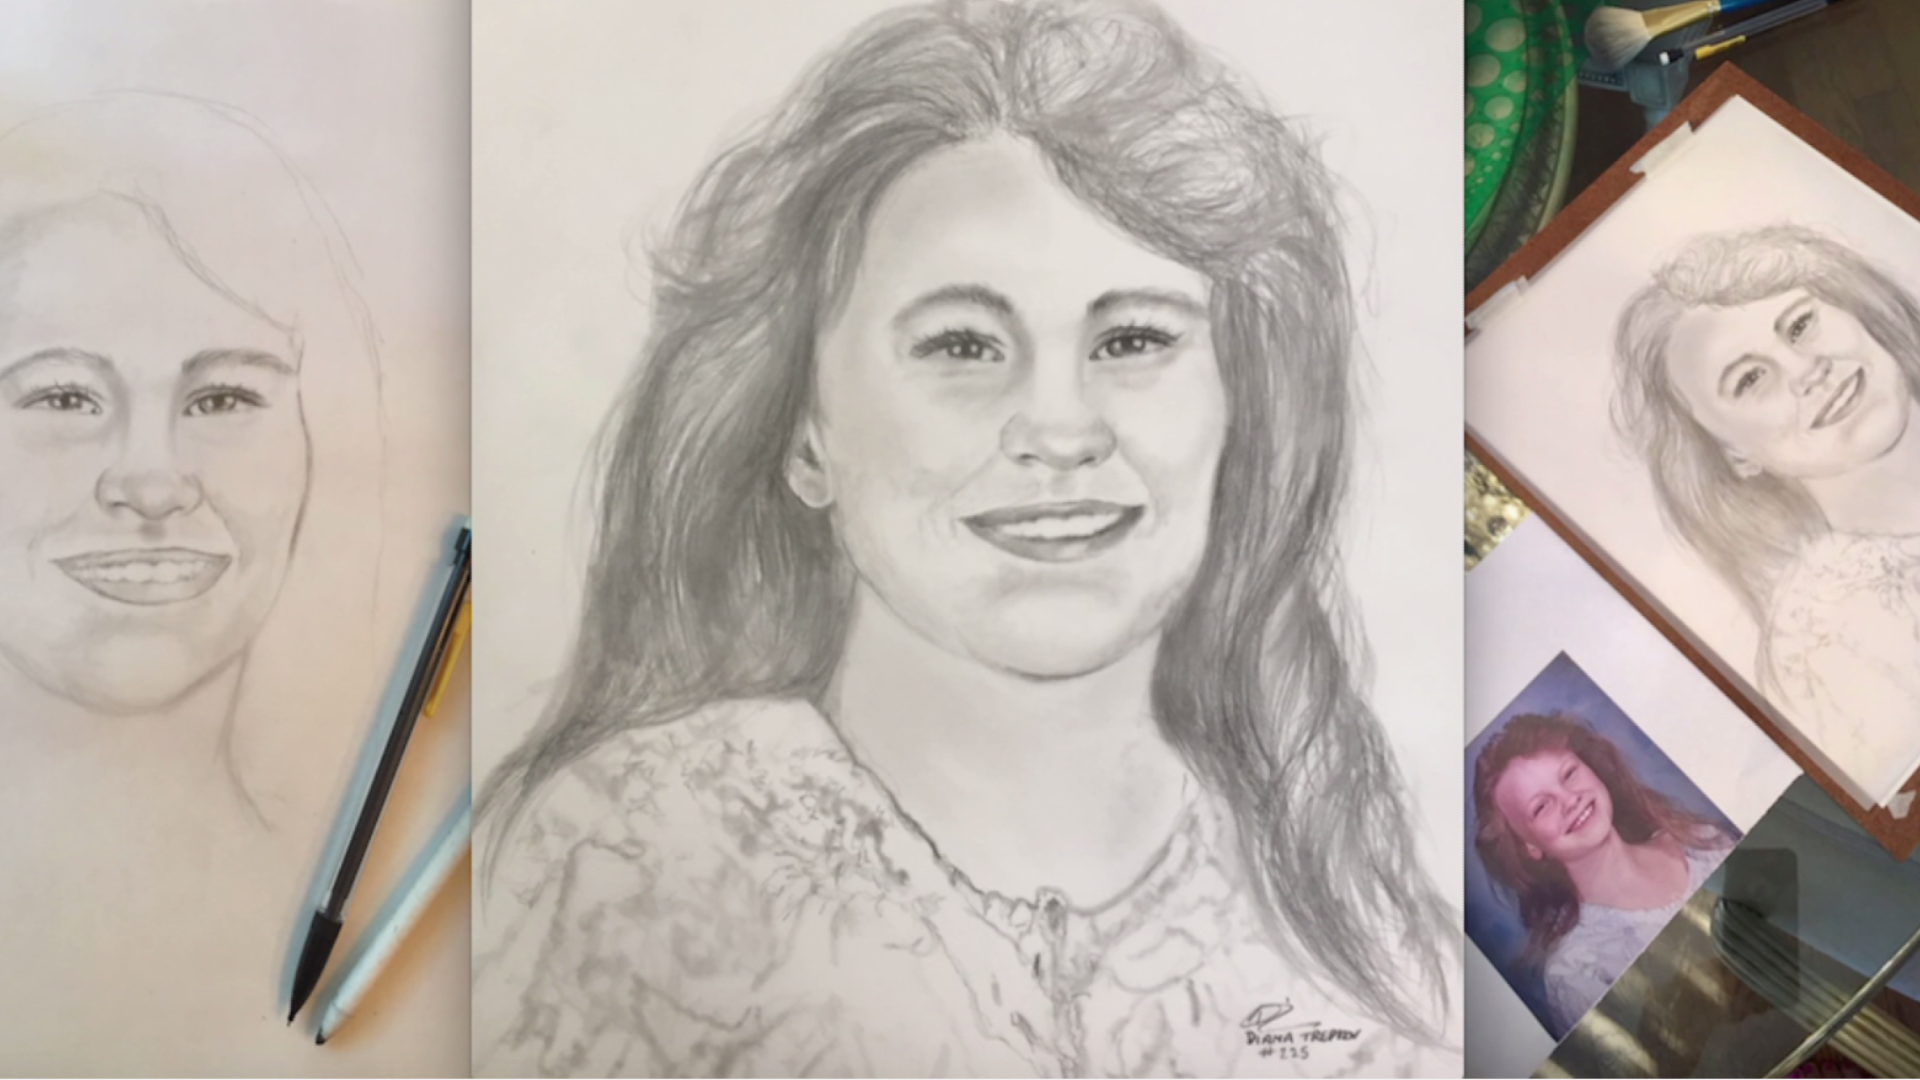 A forensic artist’s gift brings the 9-year-old back to life for the side of her family that grieved in private.